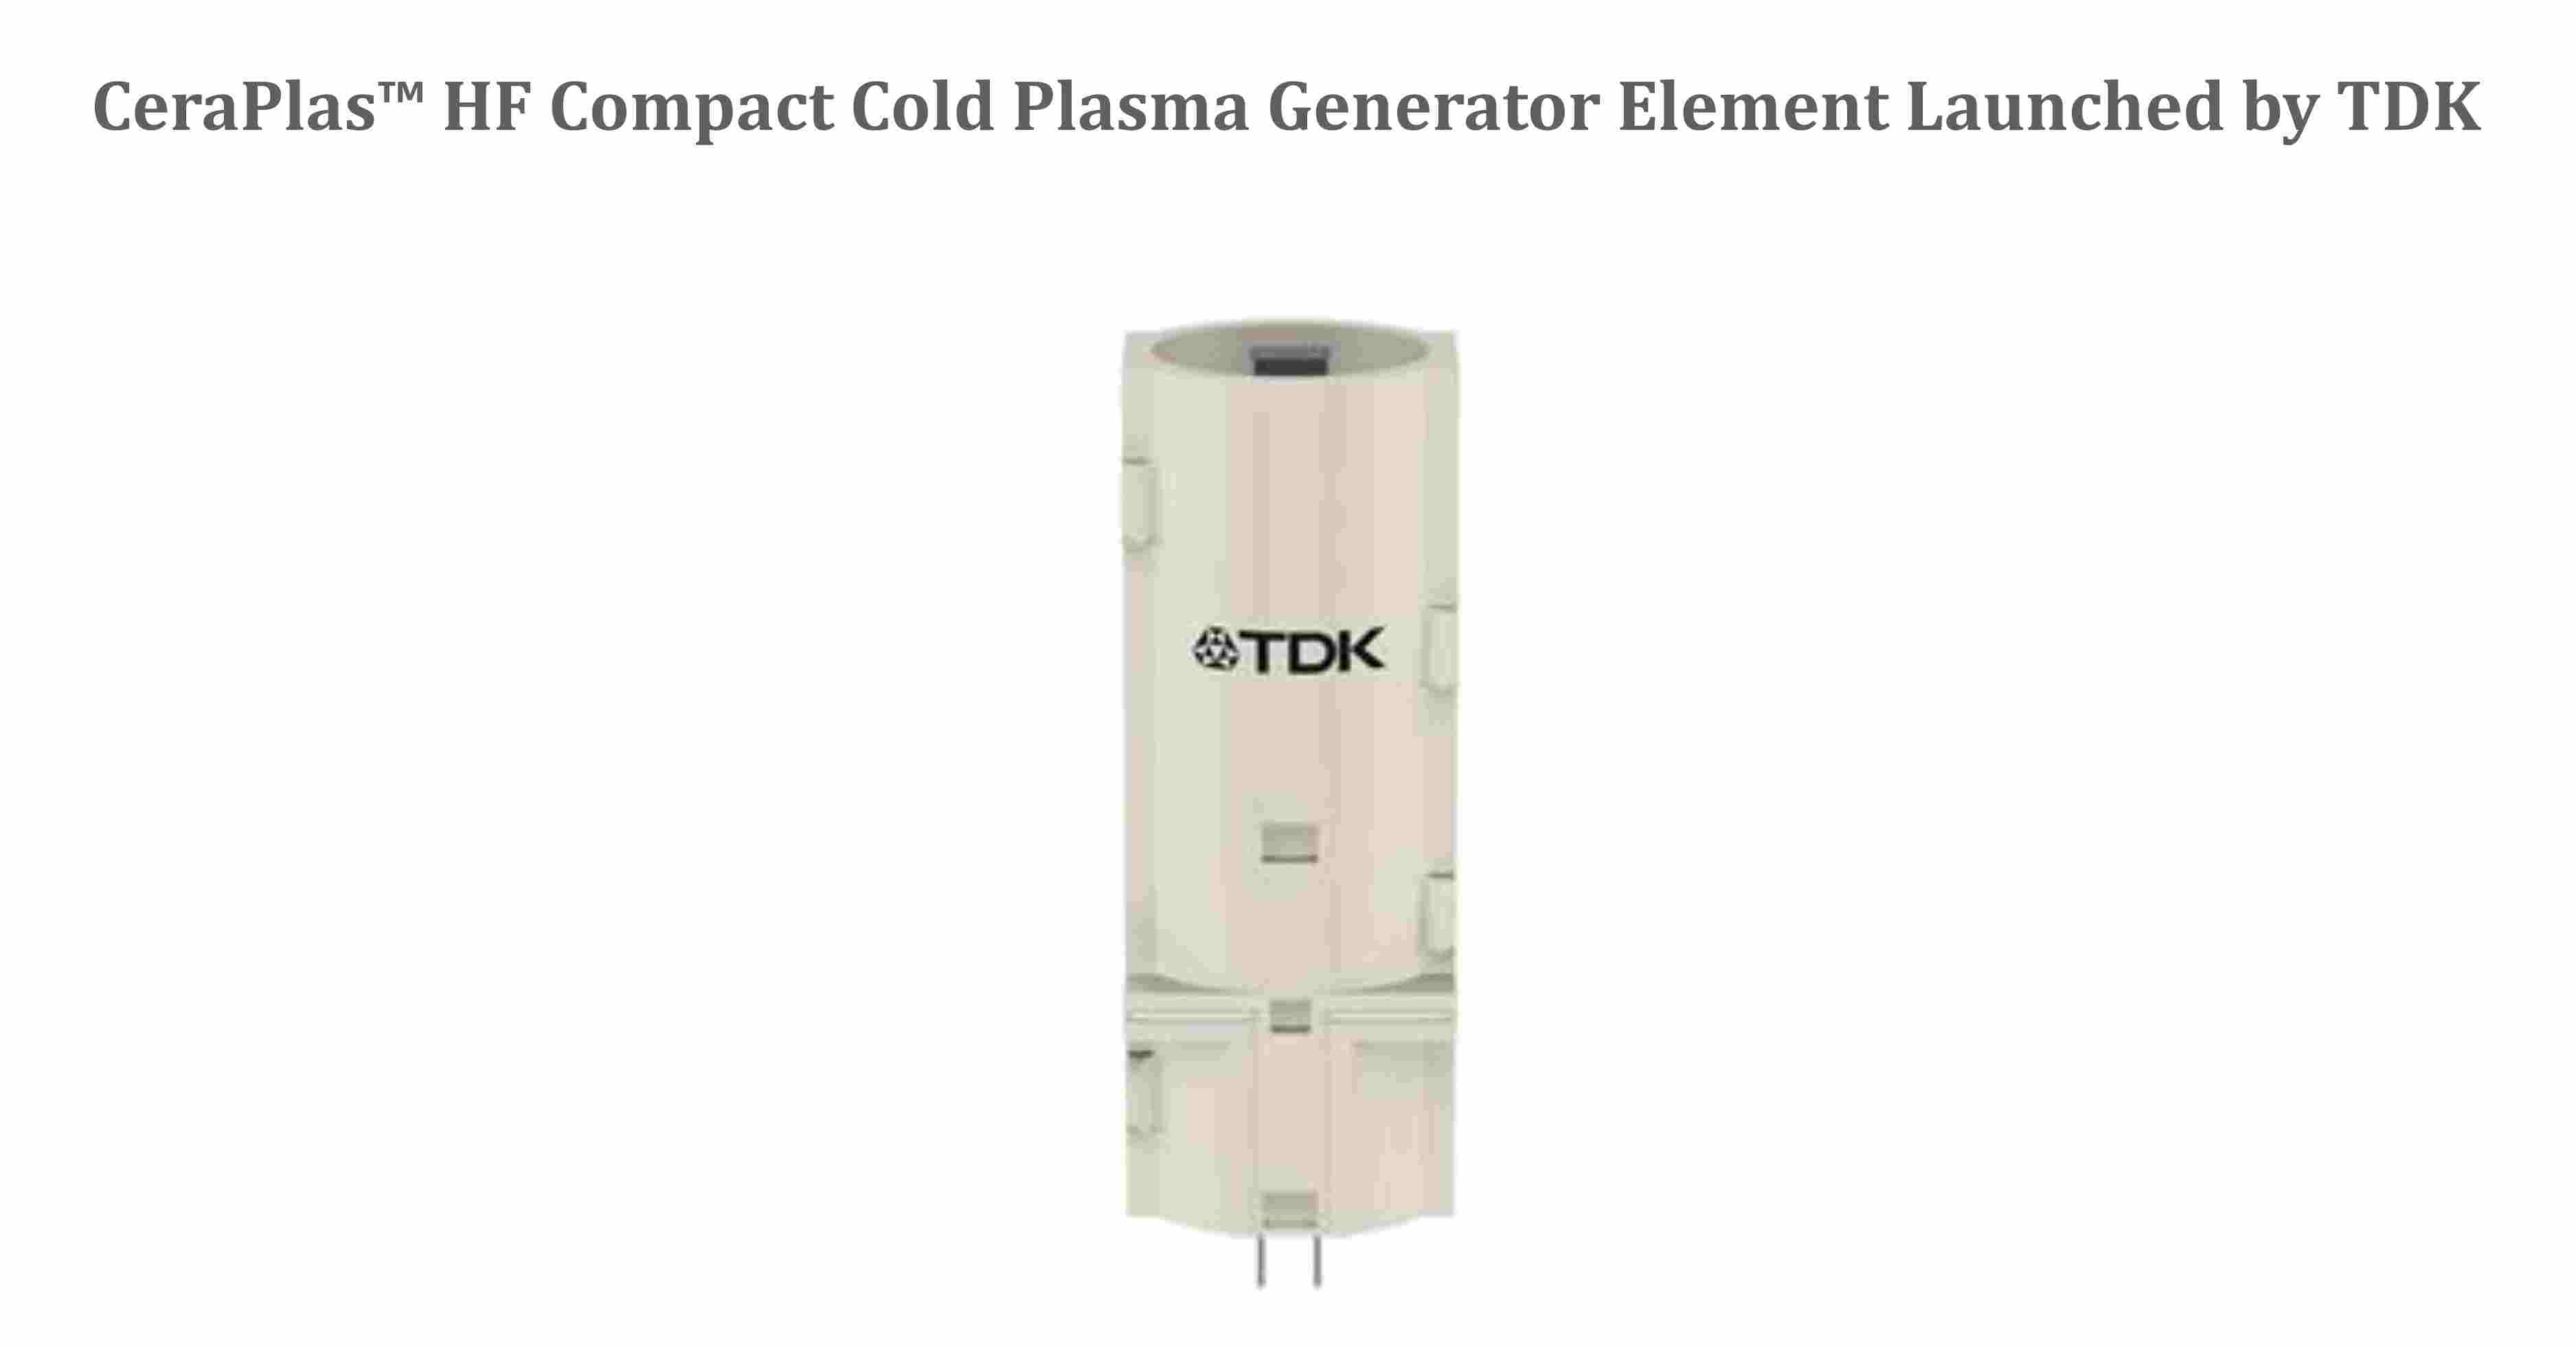 New Cold Plasma Generator Element Introduced by TDK